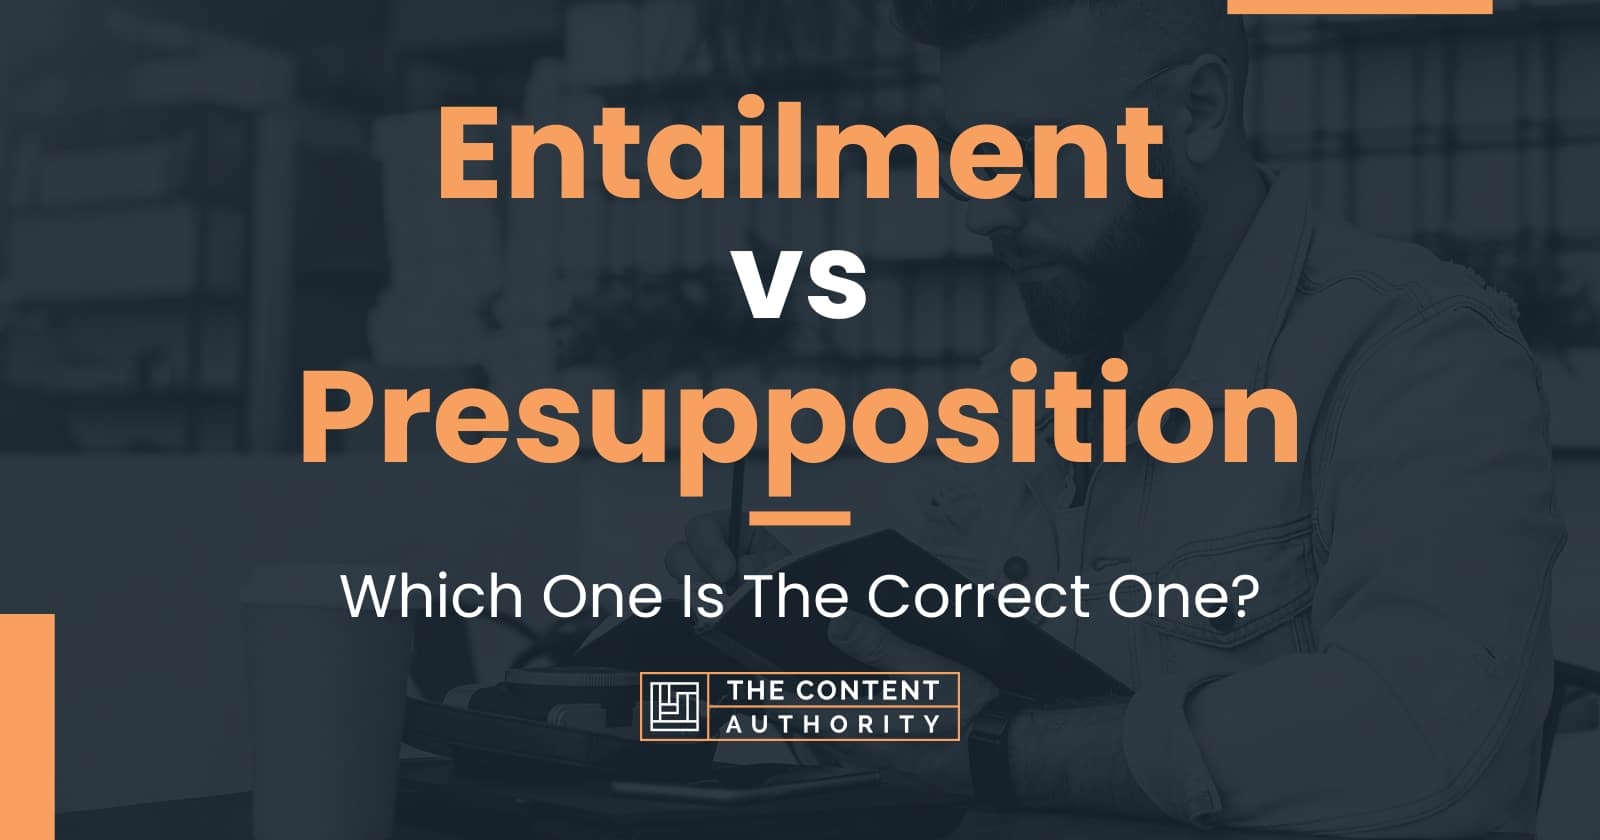 entailment-vs-presupposition-which-one-is-the-correct-one